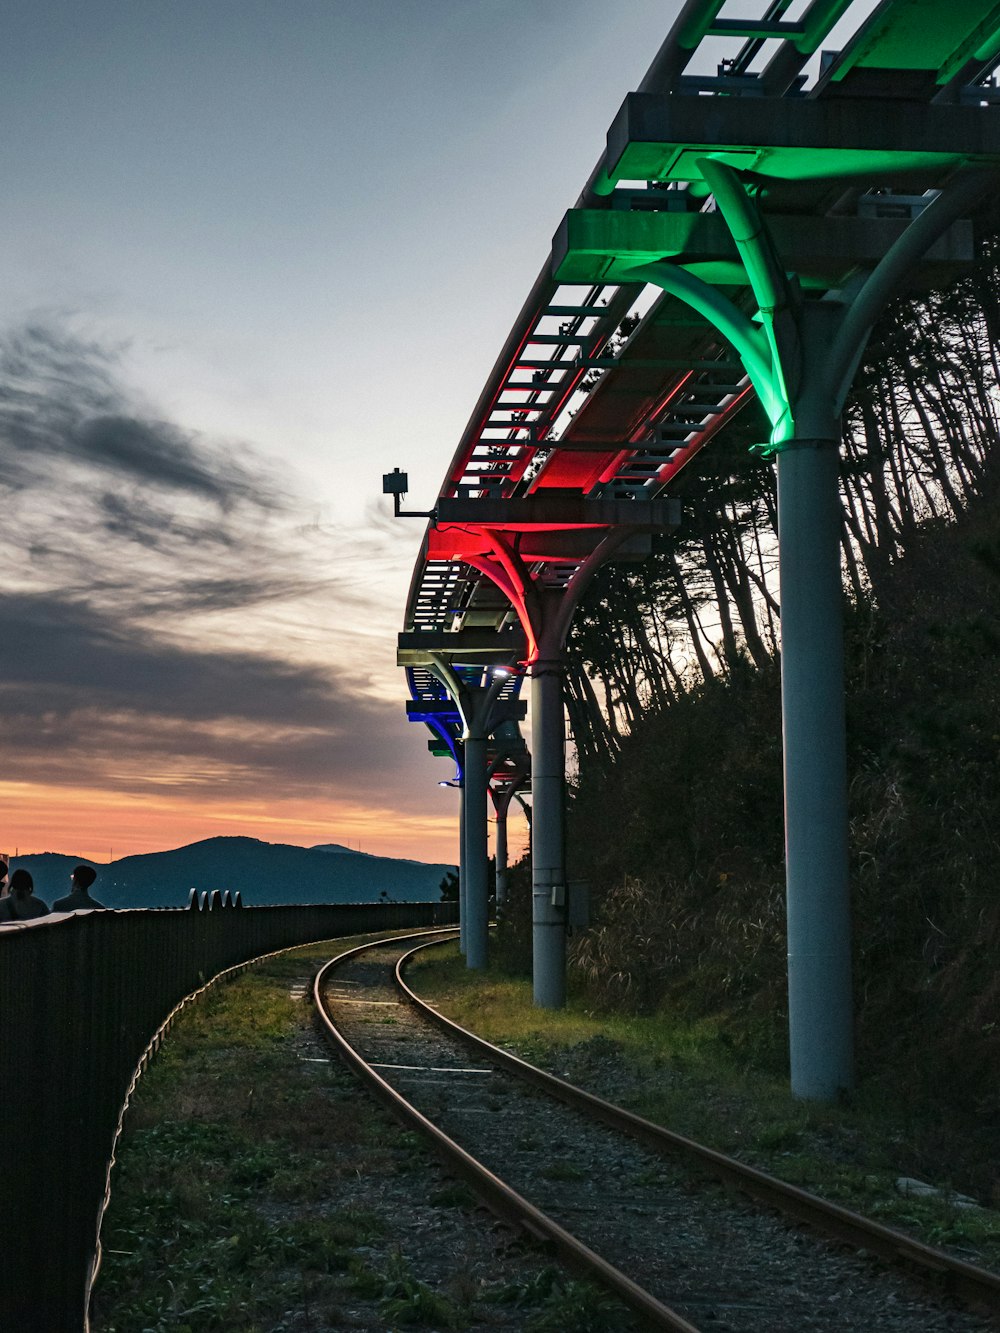 a train track with a green and red light on it